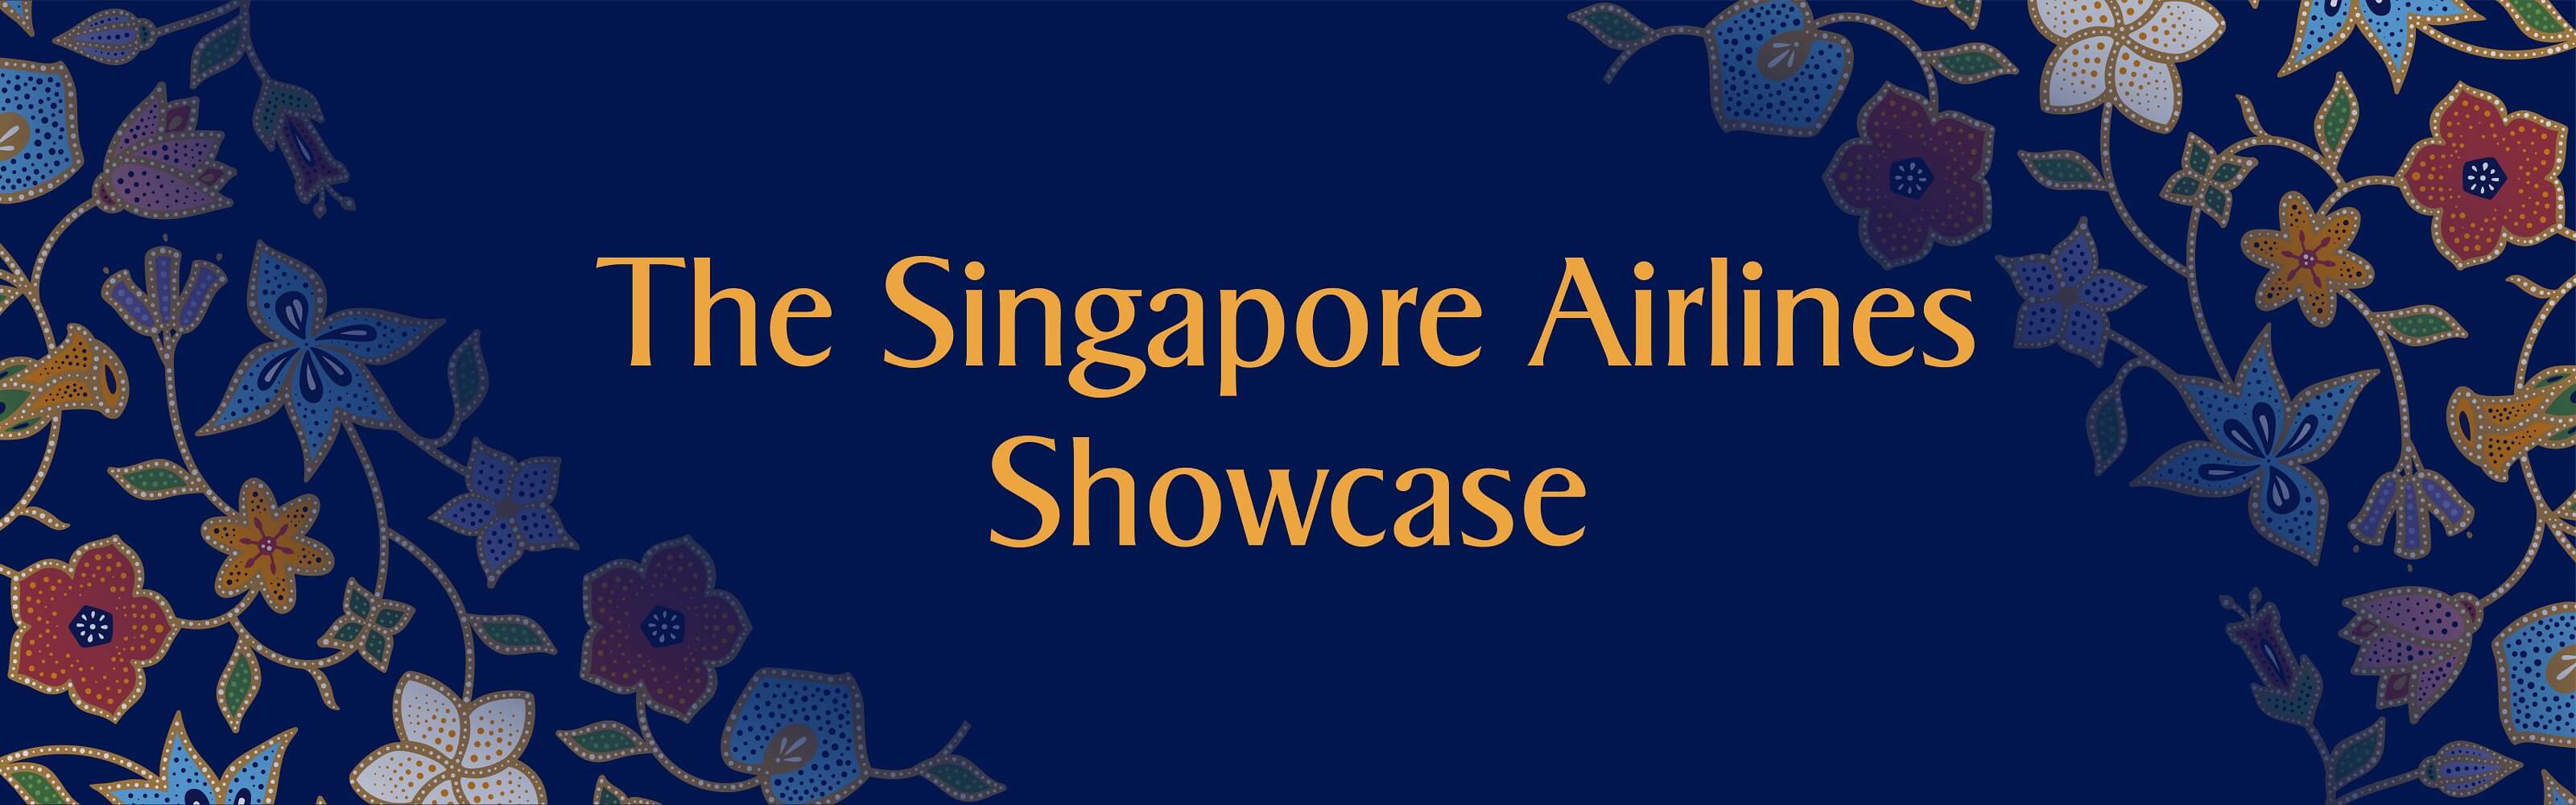 The Singapore Airlines Showcase